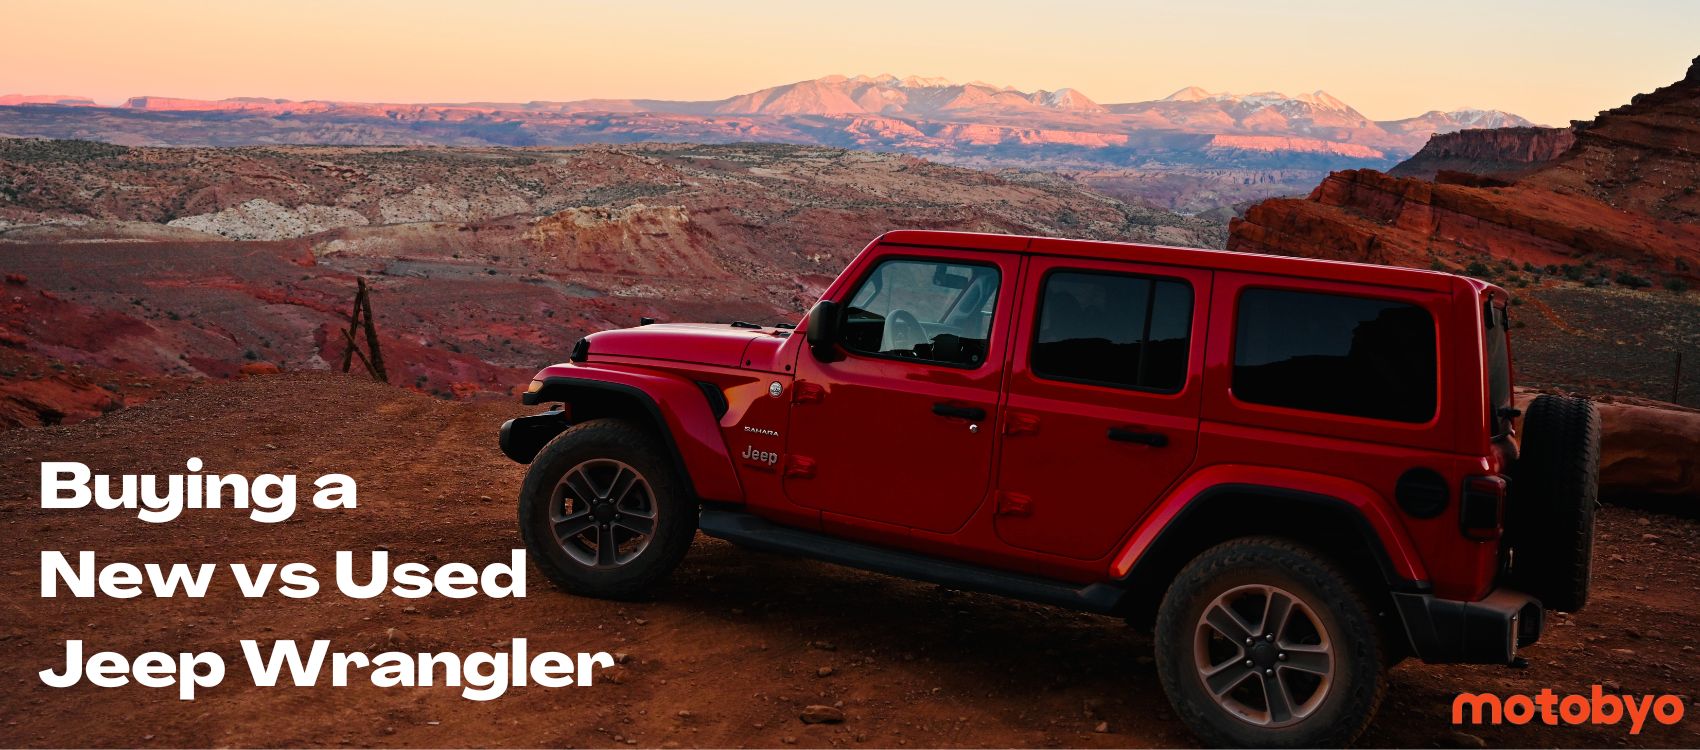 Pros & Cons of Buying a New vs Used Jeep Wrangler